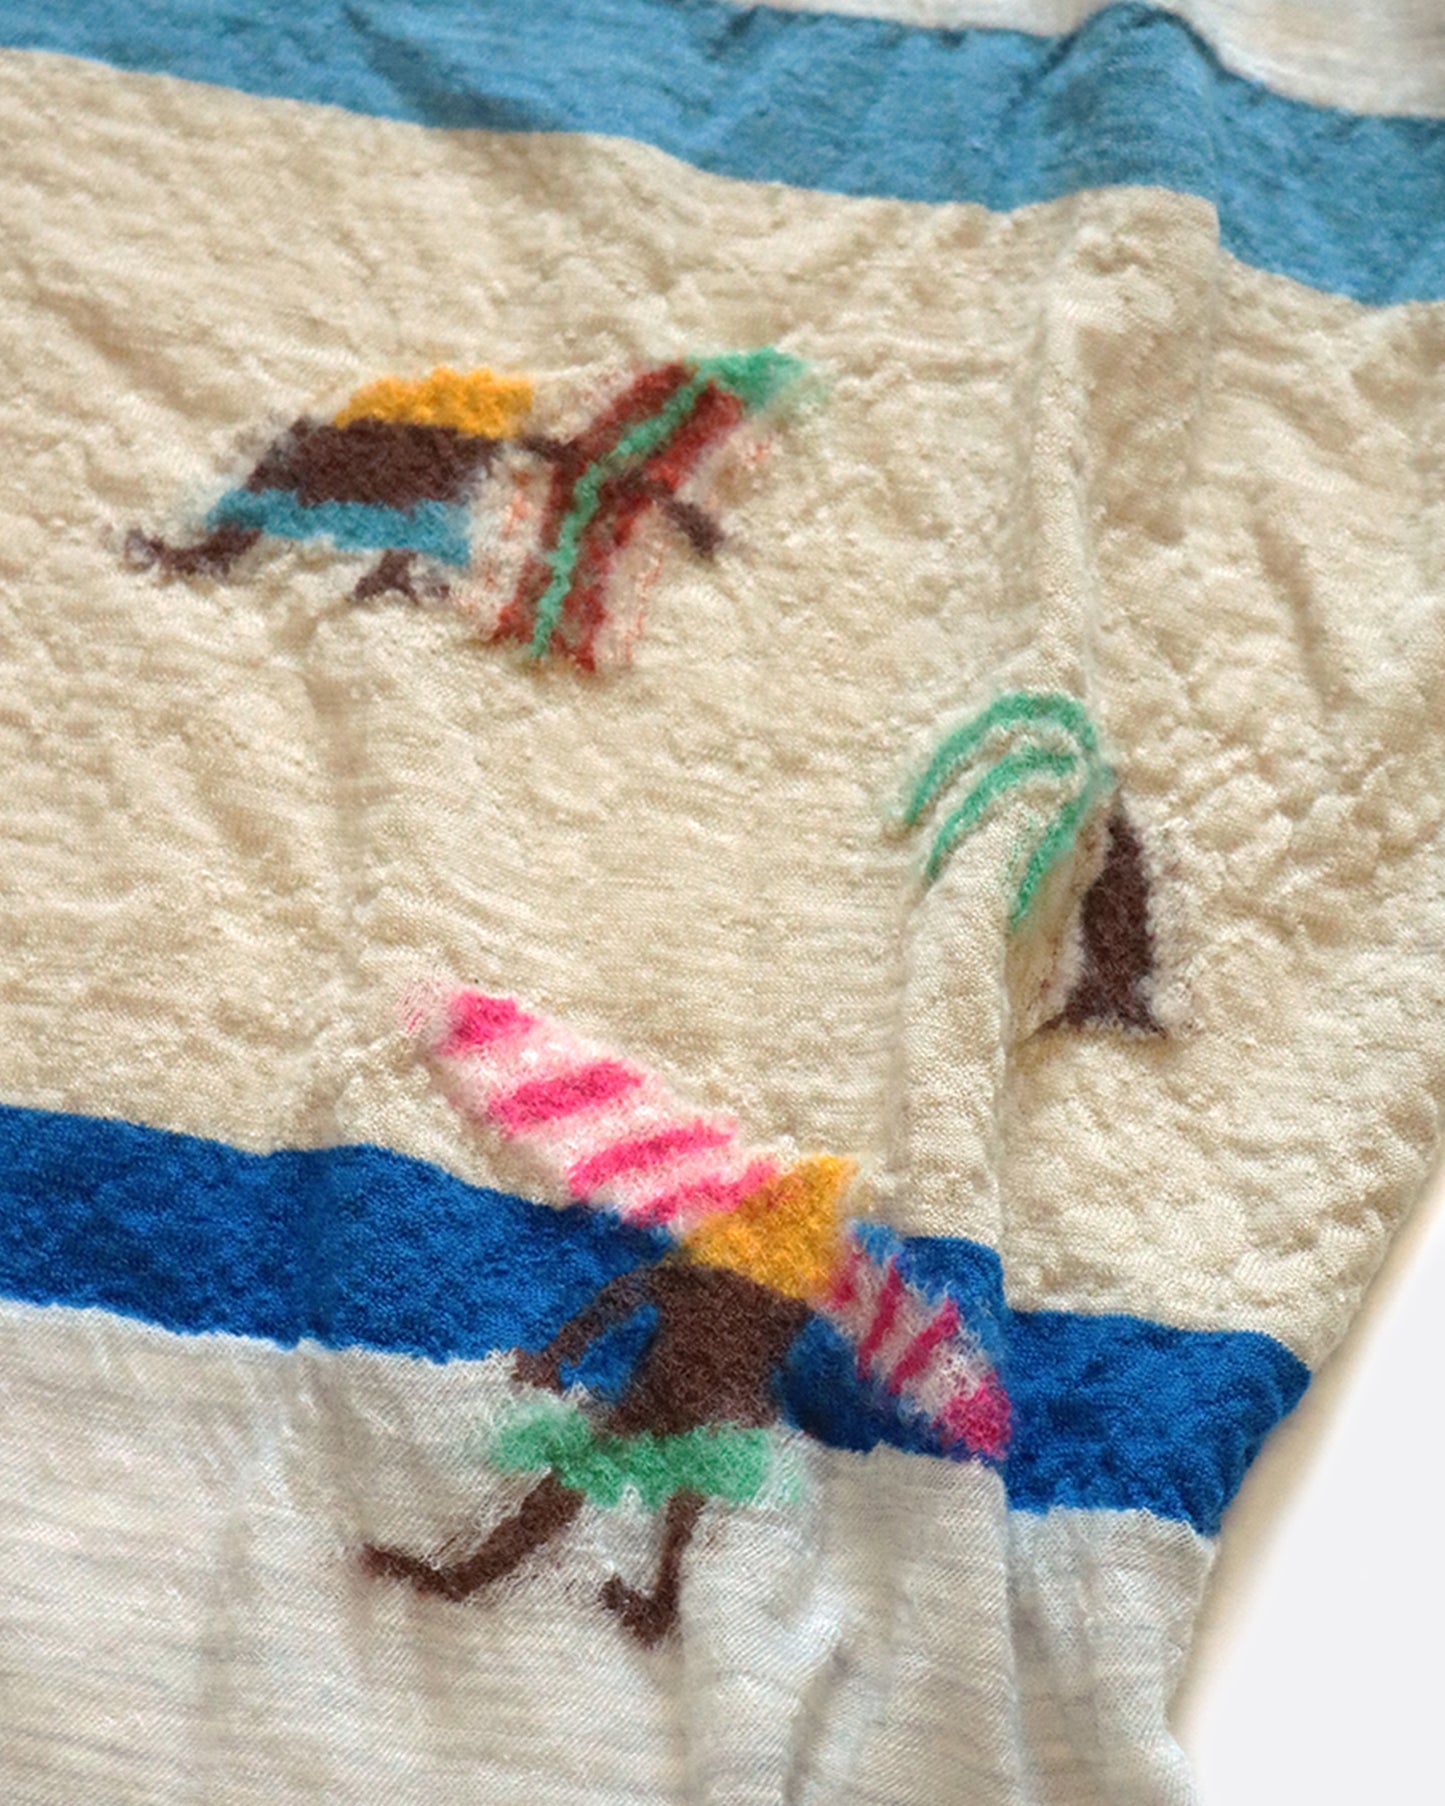 A compressed wool scarf with a fun pattern of surfers on a sandy beach.